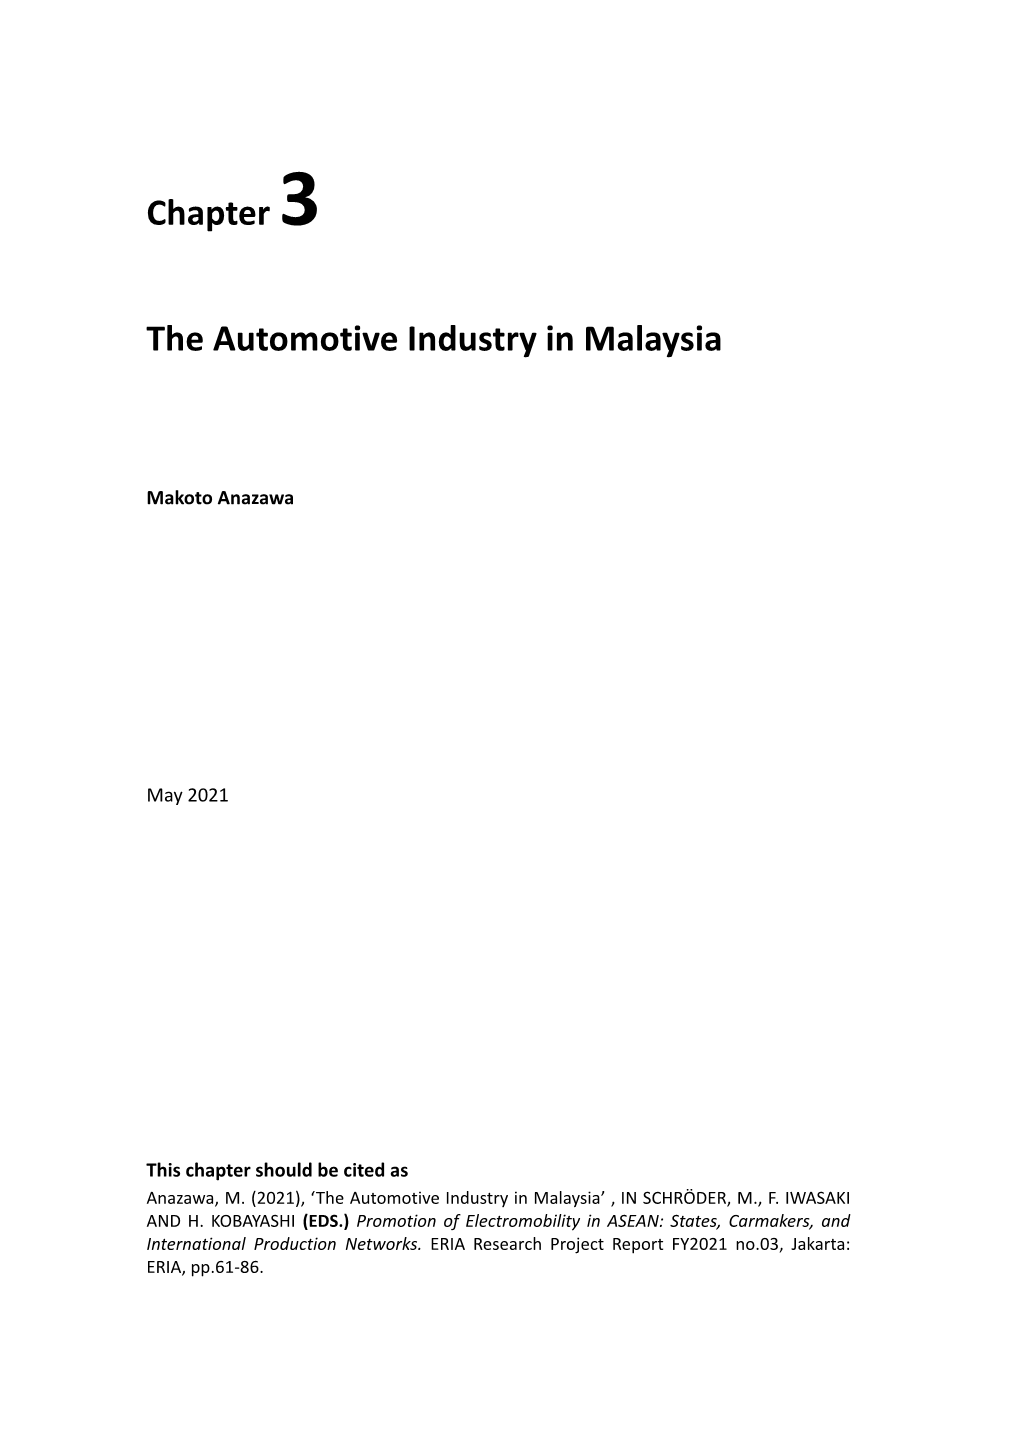 Chapter 3: the Automotive Industry in Malaysia